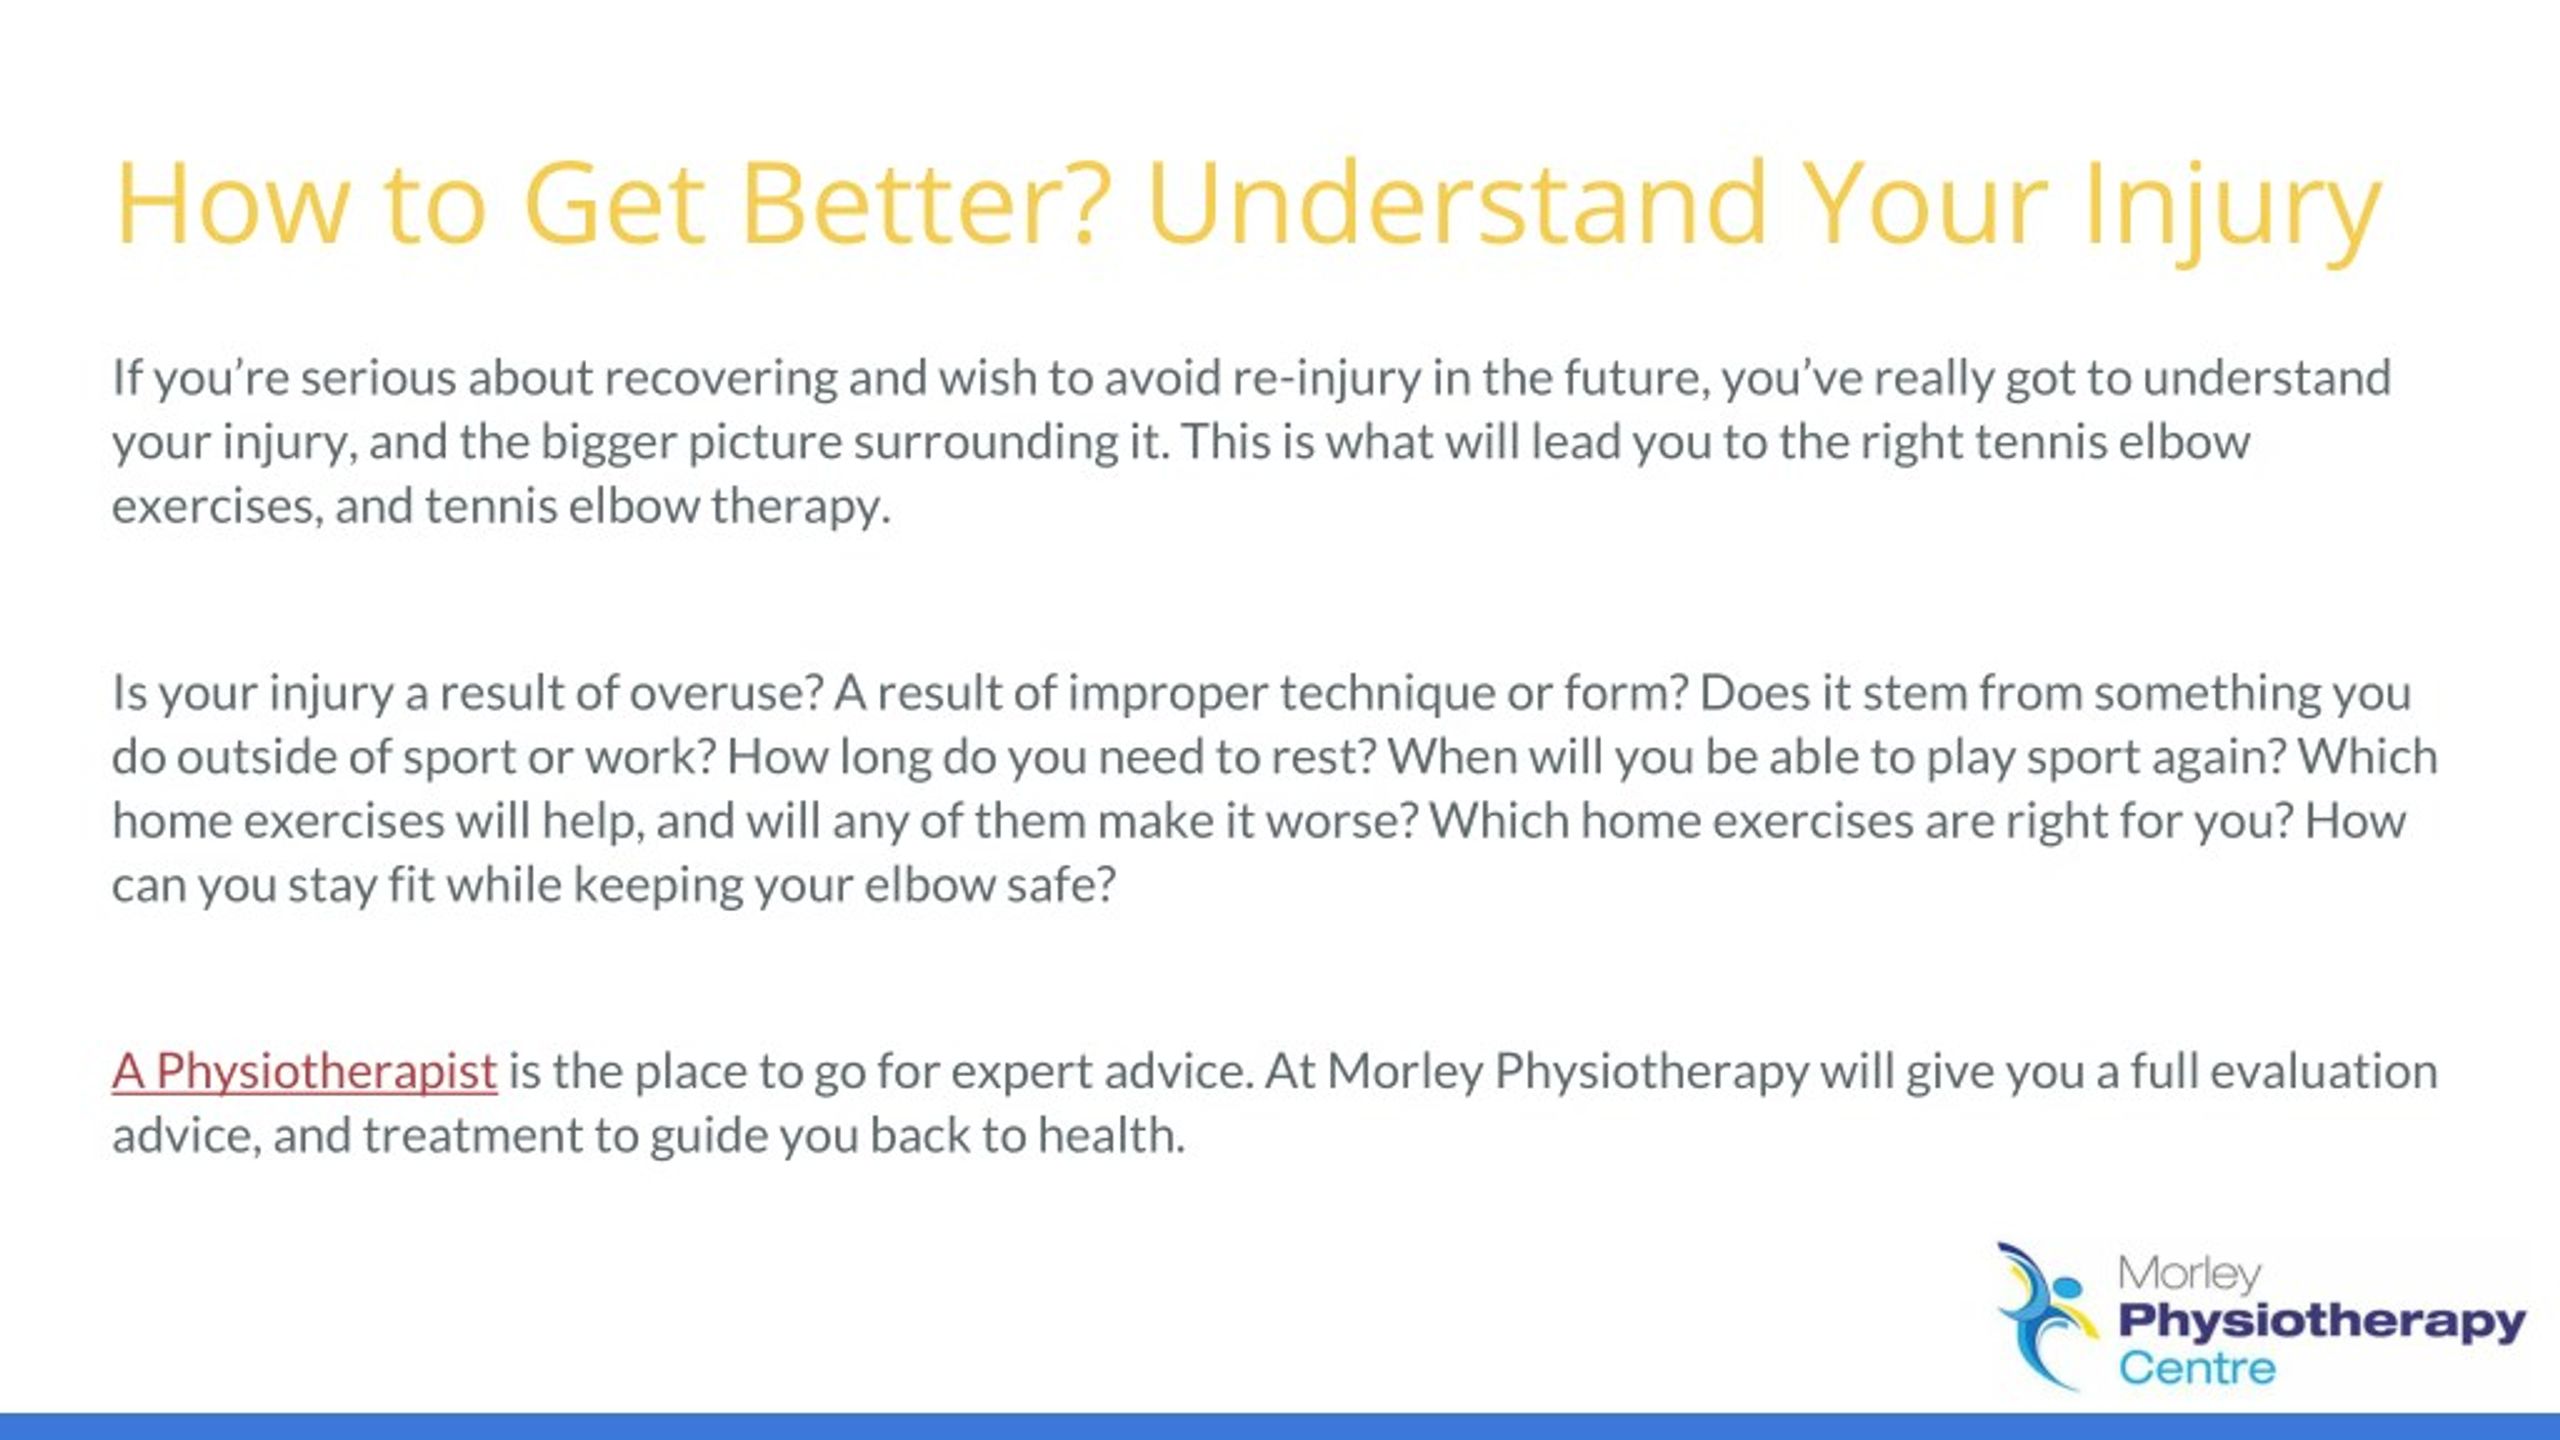 Ppt Tennis Elbow Have You Got It And What To Do Morley Physiotherapy Centre Powerpoint Presentation Id 7792300